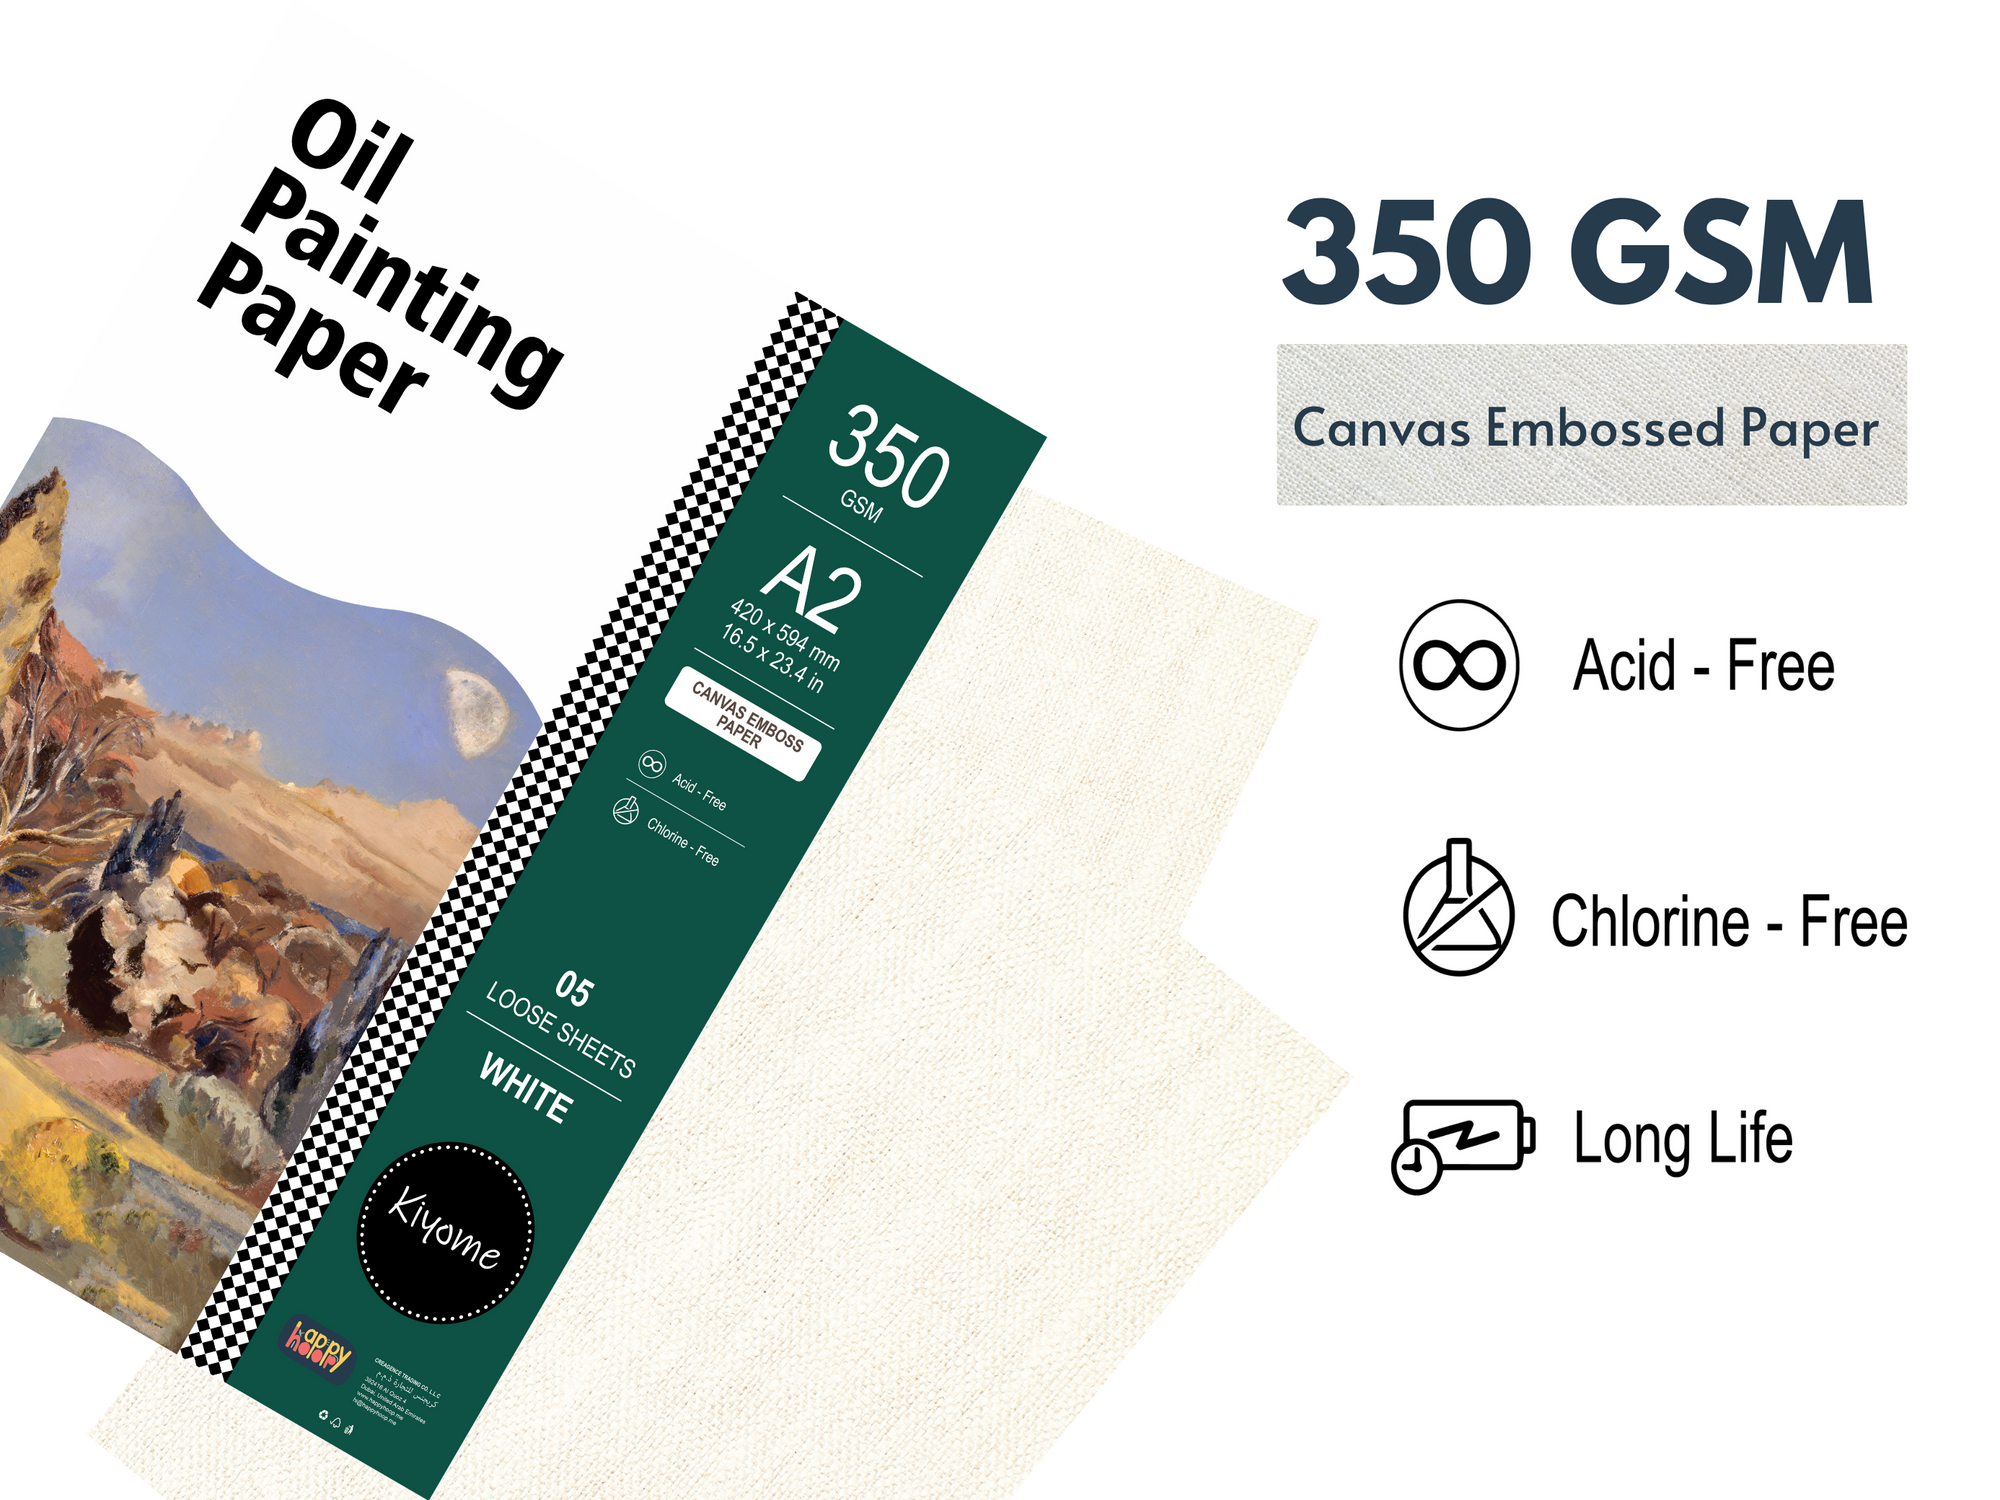 Kiyome Oil Painting Sheets | 350 GSM | A2 | 5 Sheets